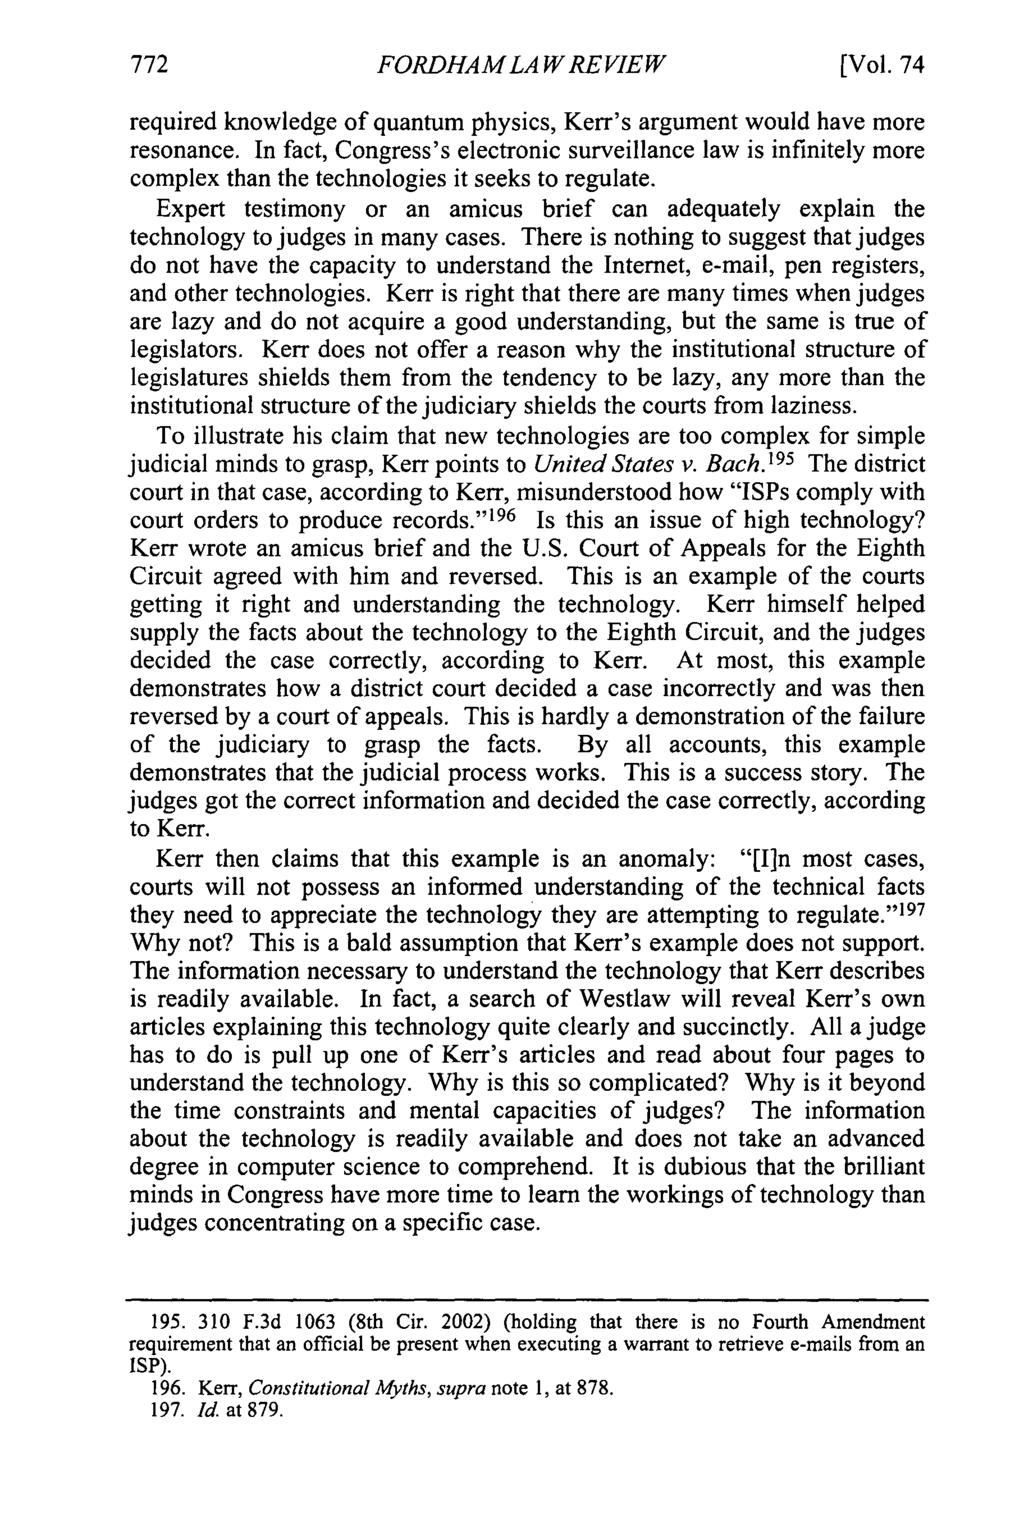 FORDHAM LA W REVIEW [Vol. 74 required knowledge of quantum physics, Kerr's argument would have more resonance.